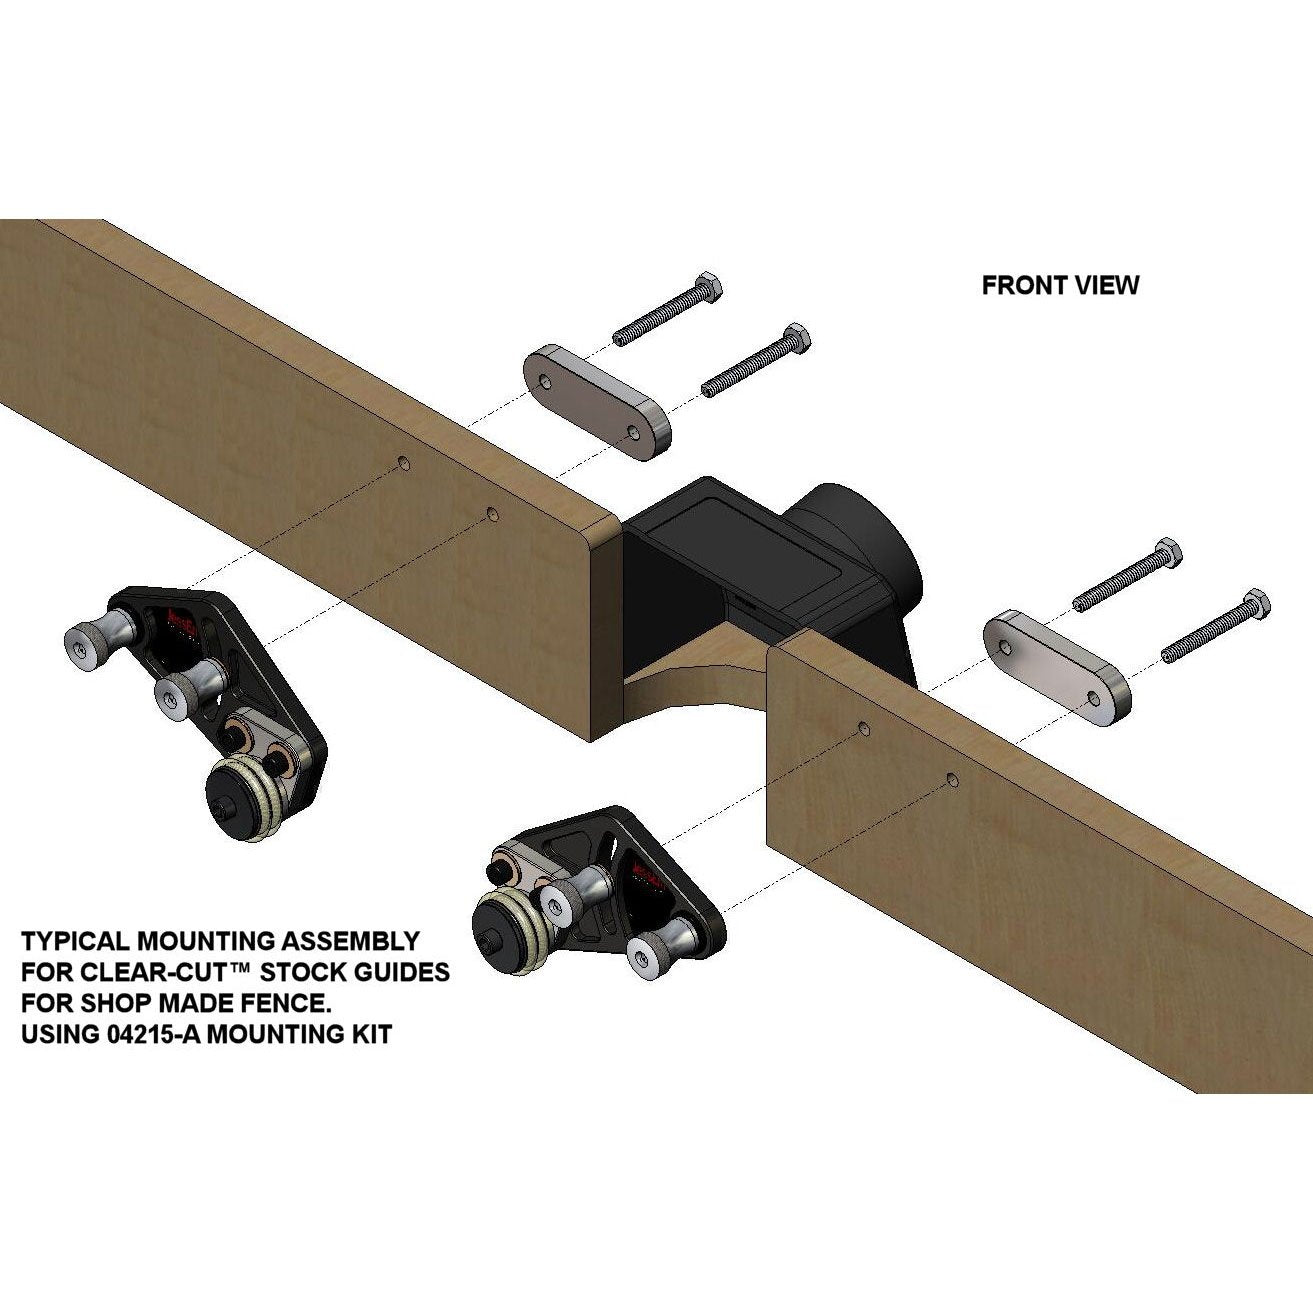 Shop Made Fence Mounting Kit for Clear-Cut Stock Guides